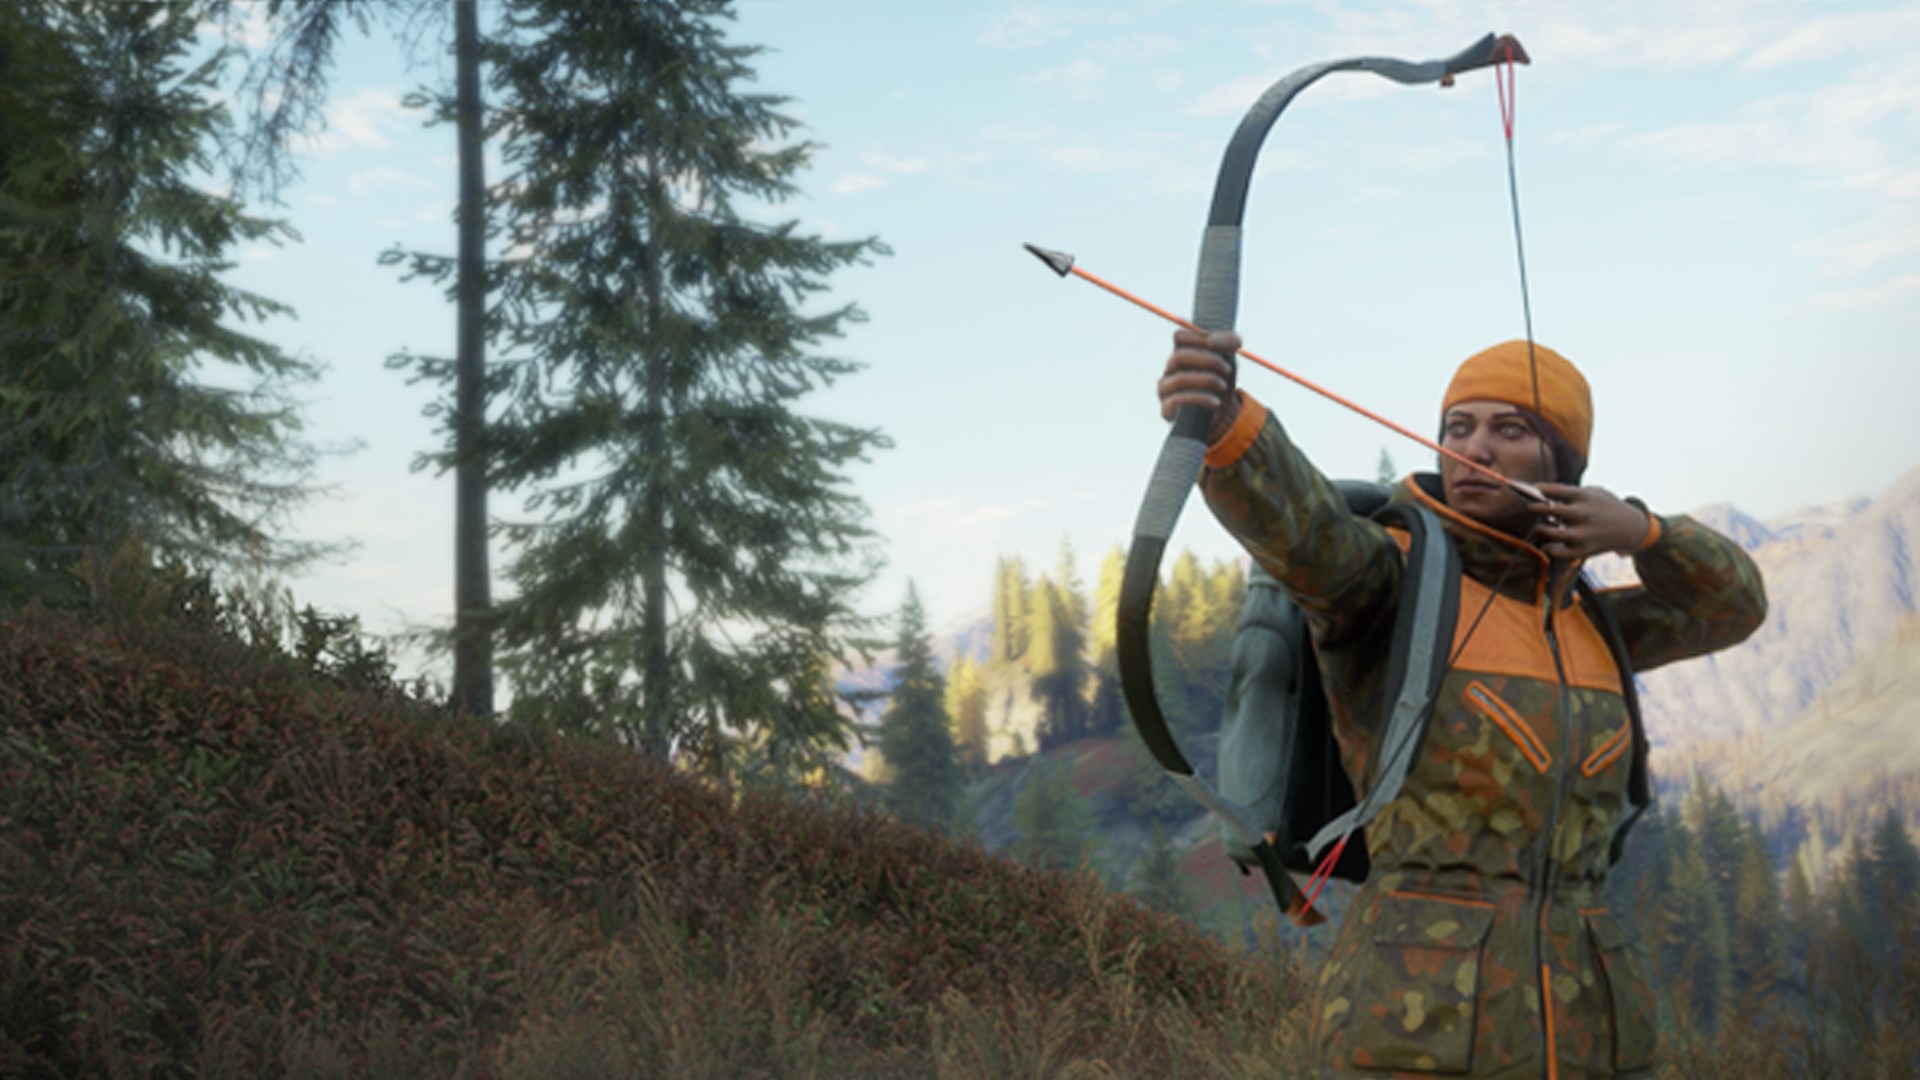 Thehunter. THEHUNTER Call of the Wild Weapon Pack. THEHUNTER Call of the Wild - Weapon Pack 1. The Hunter Call of the Wild арбалет. The Hunter Call of the Wild оружие.